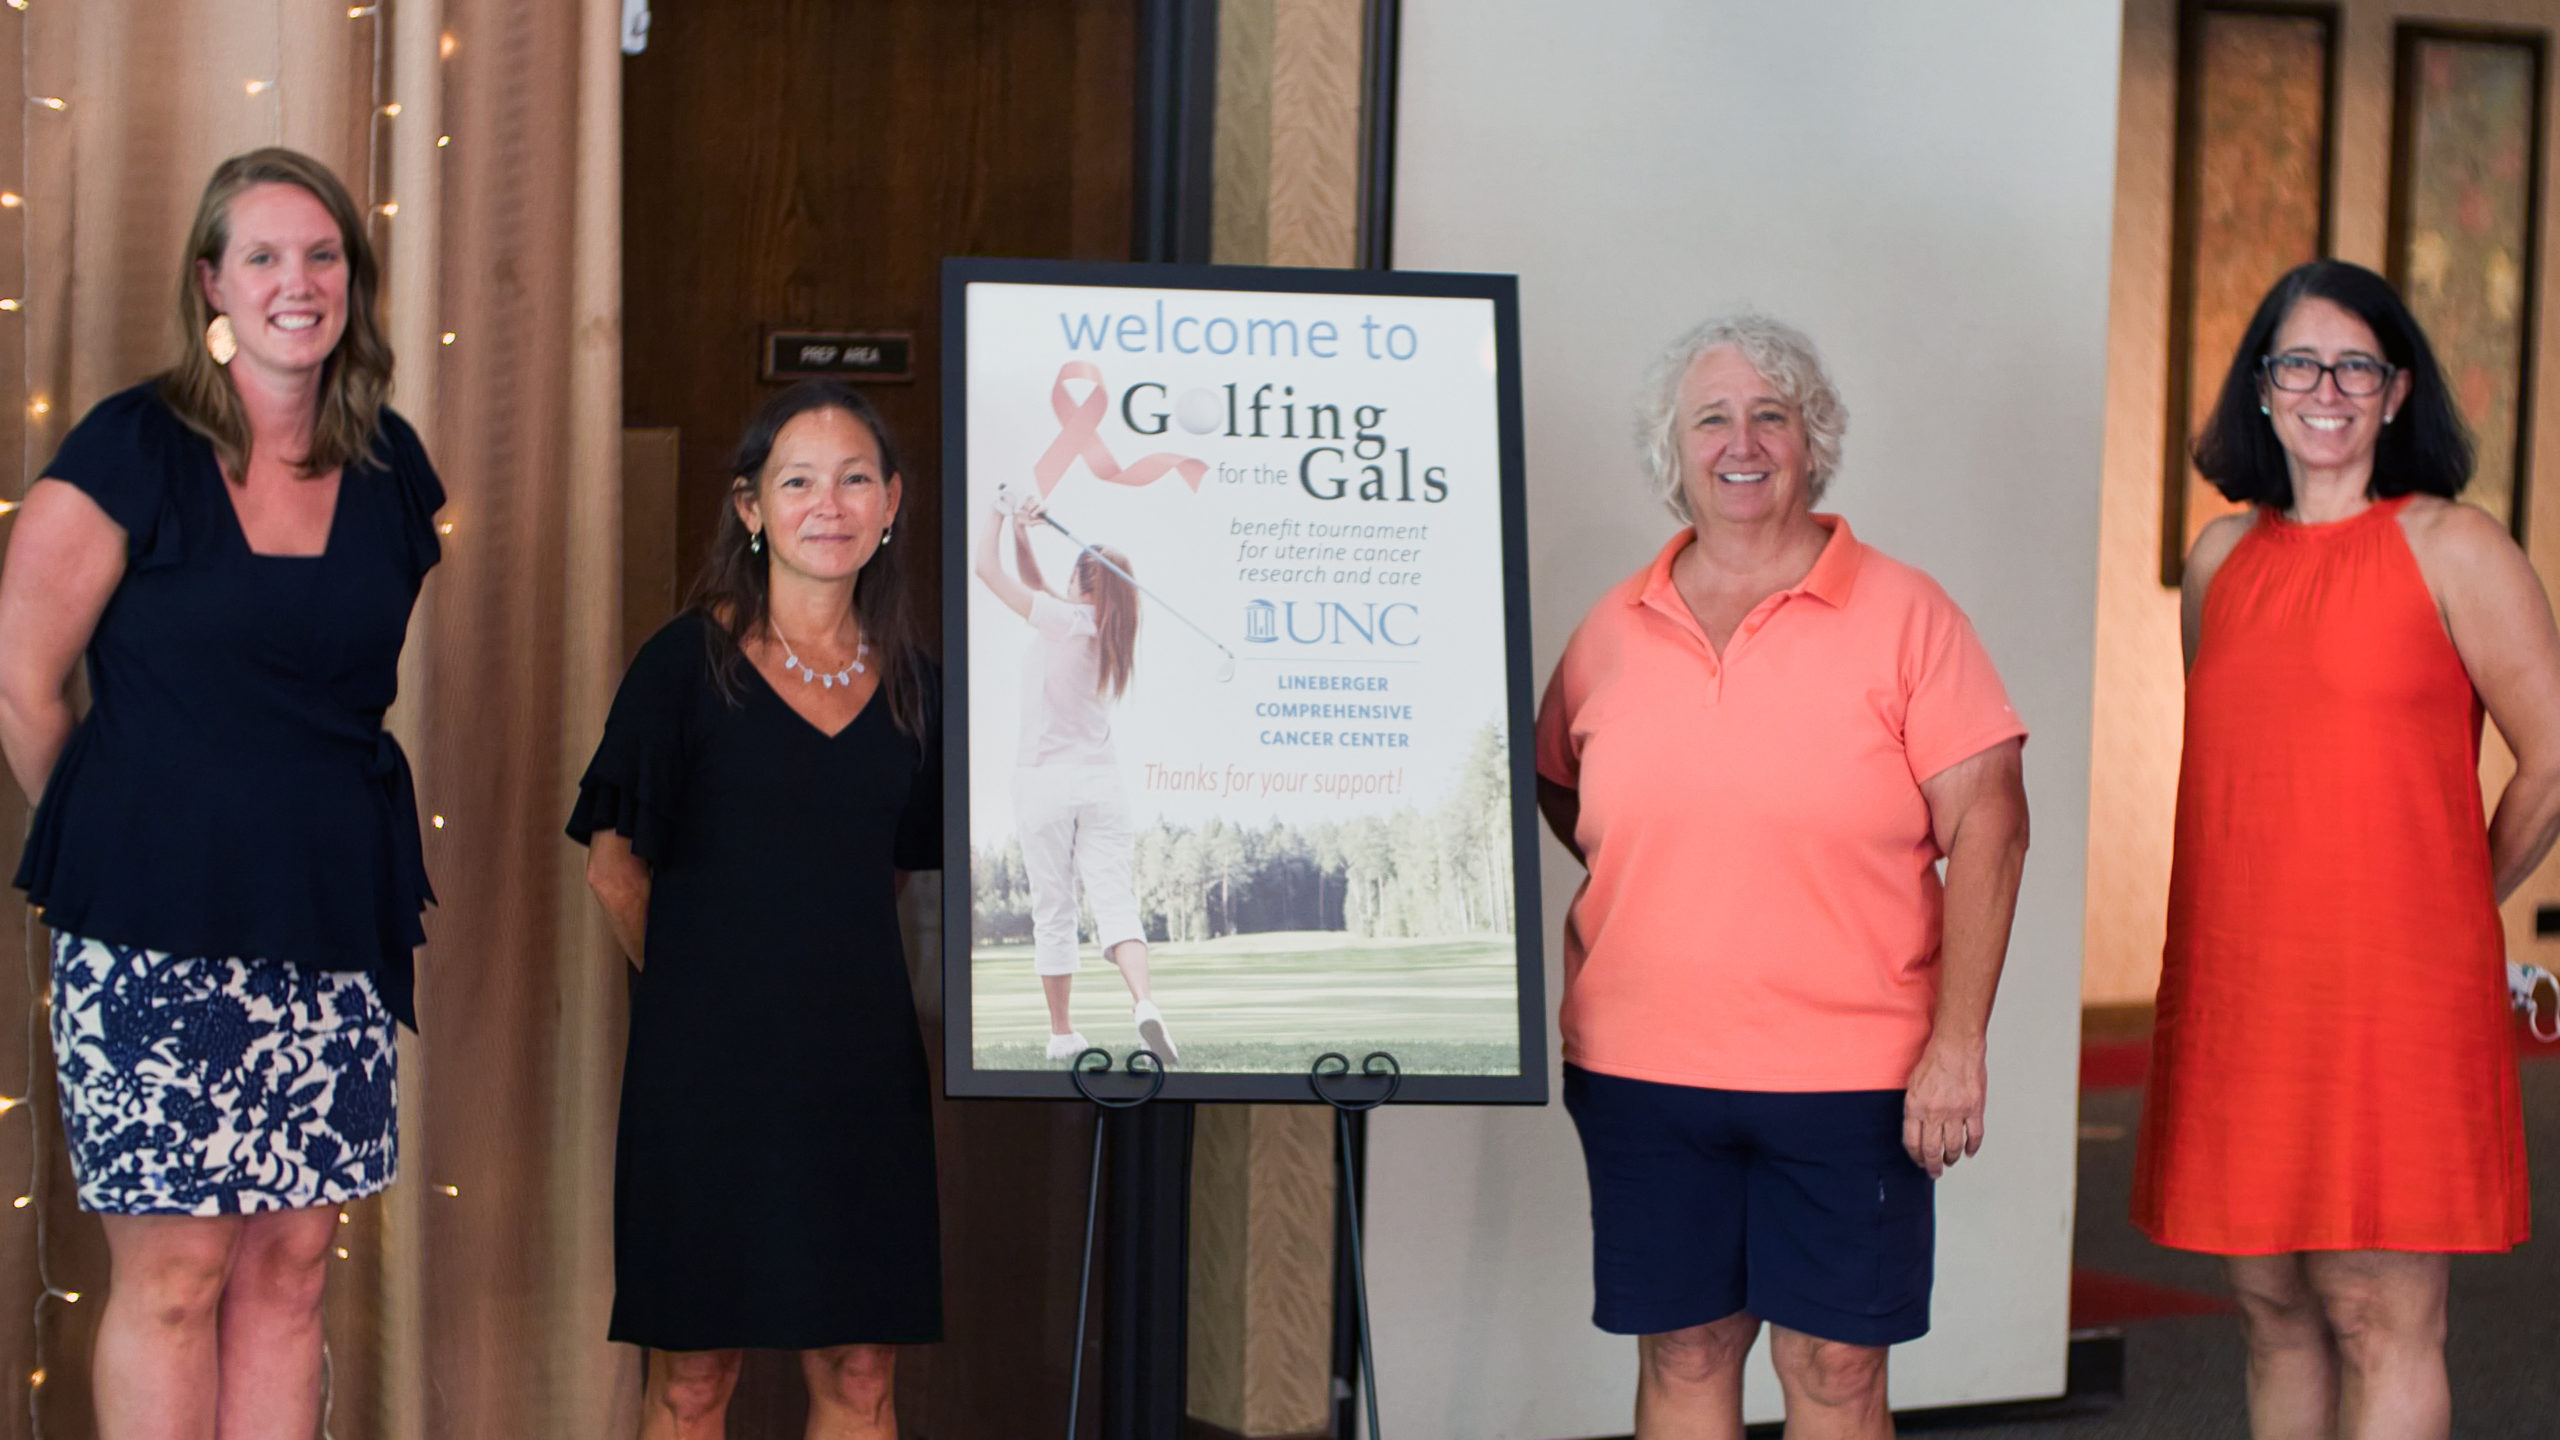 Overcoming Obstacles with Golf: Golfing for the Gals Annual Fundraising Event